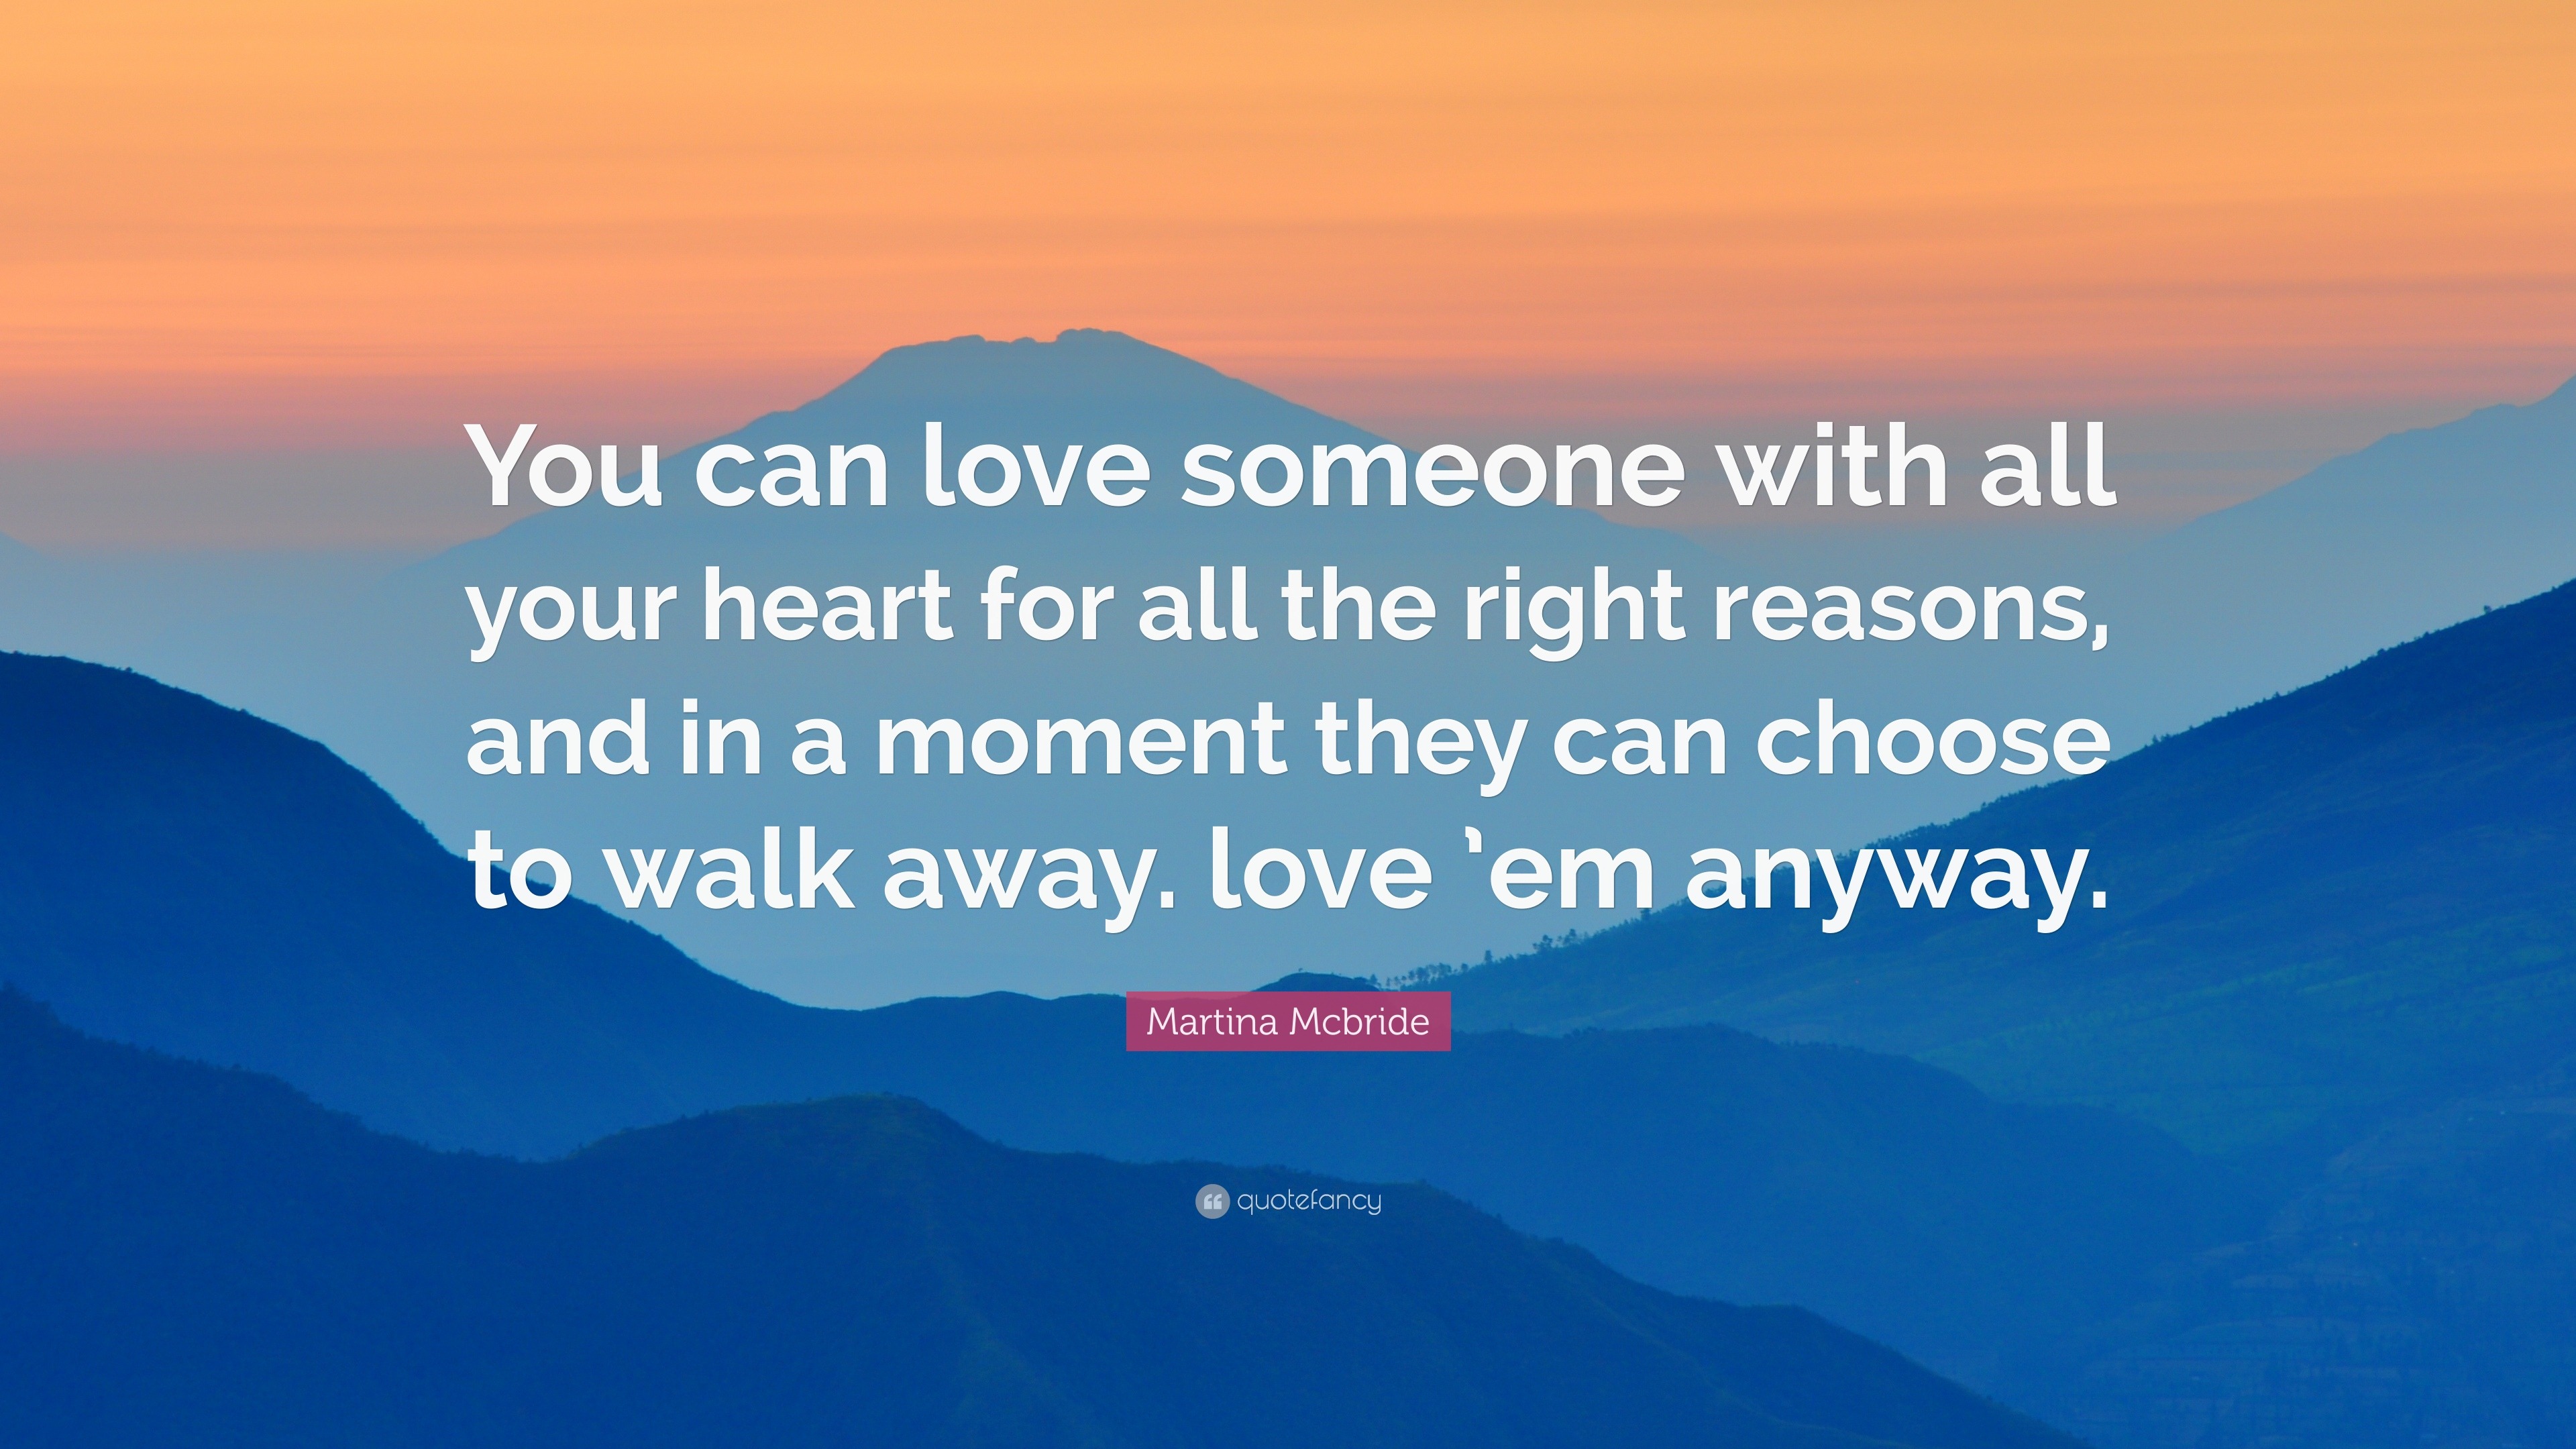 Martina Mcbride Quote: “You can love someone with all your heart for ...